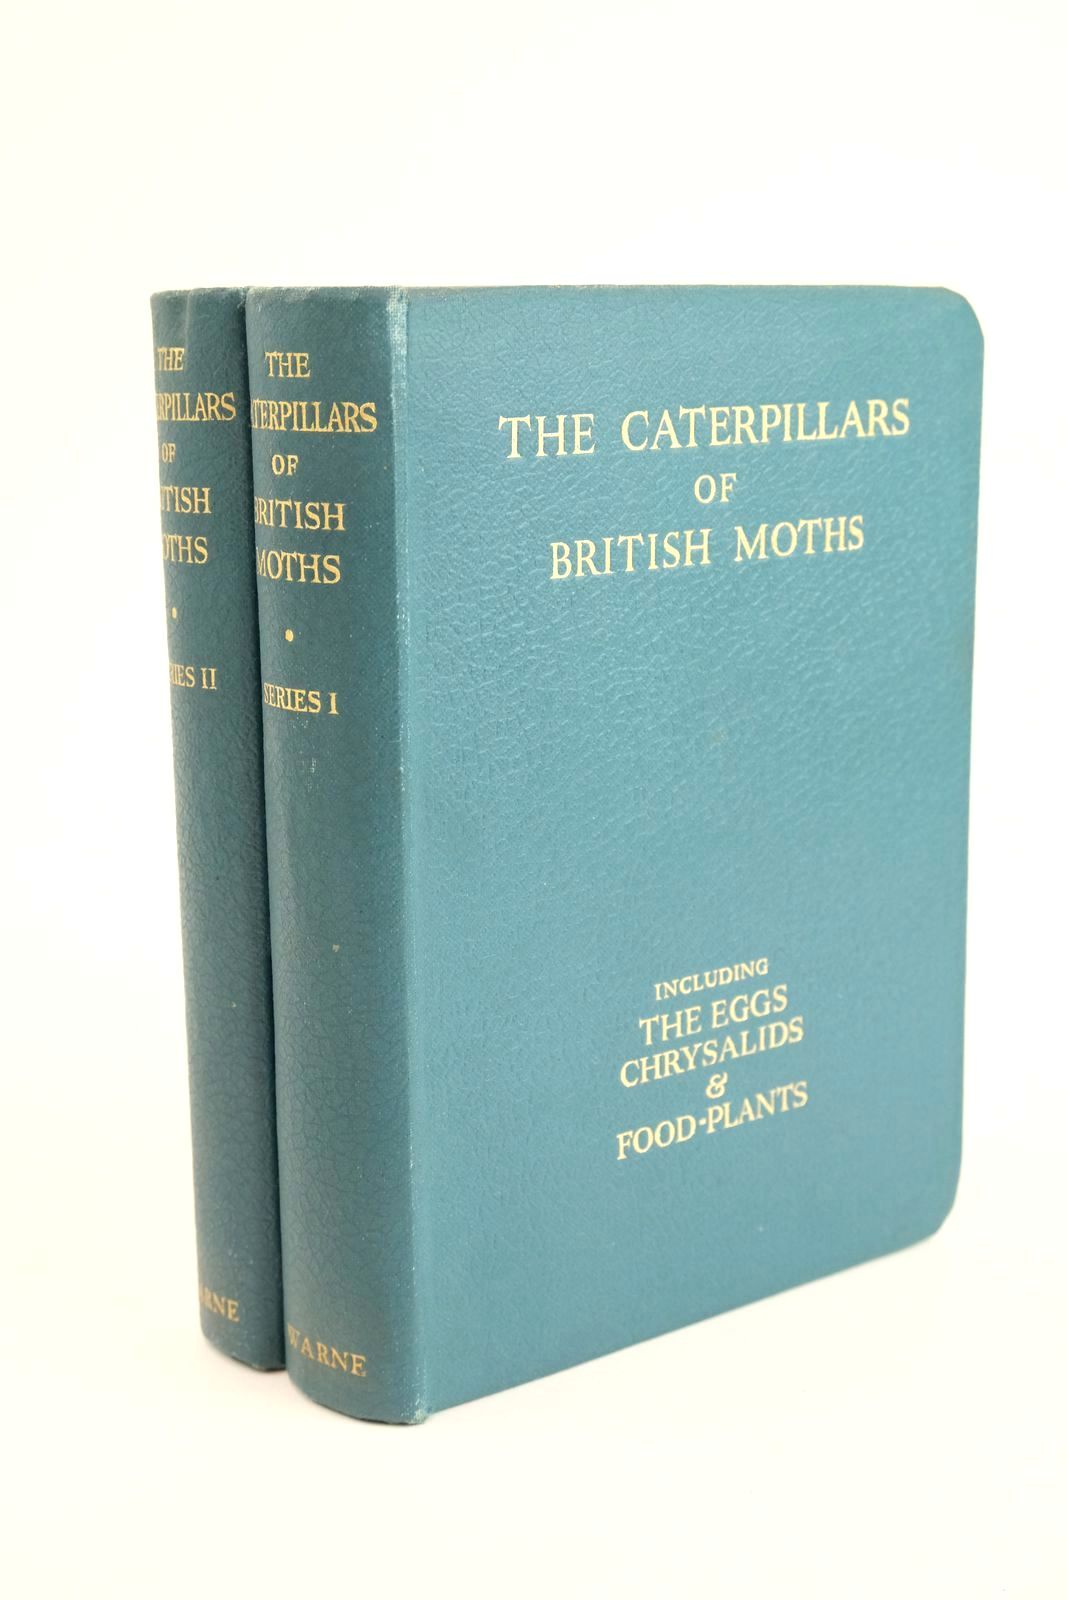 Photo of THE CATERPILLARS OF BRITISH MOTHS (2 VOLUMES) written by Stokoe, W.J. Stovin, G.H.T. illustrated by Dollman, J.C. published by Frederick Warne &amp; Co Ltd. (STOCK CODE: 1323742)  for sale by Stella & Rose's Books